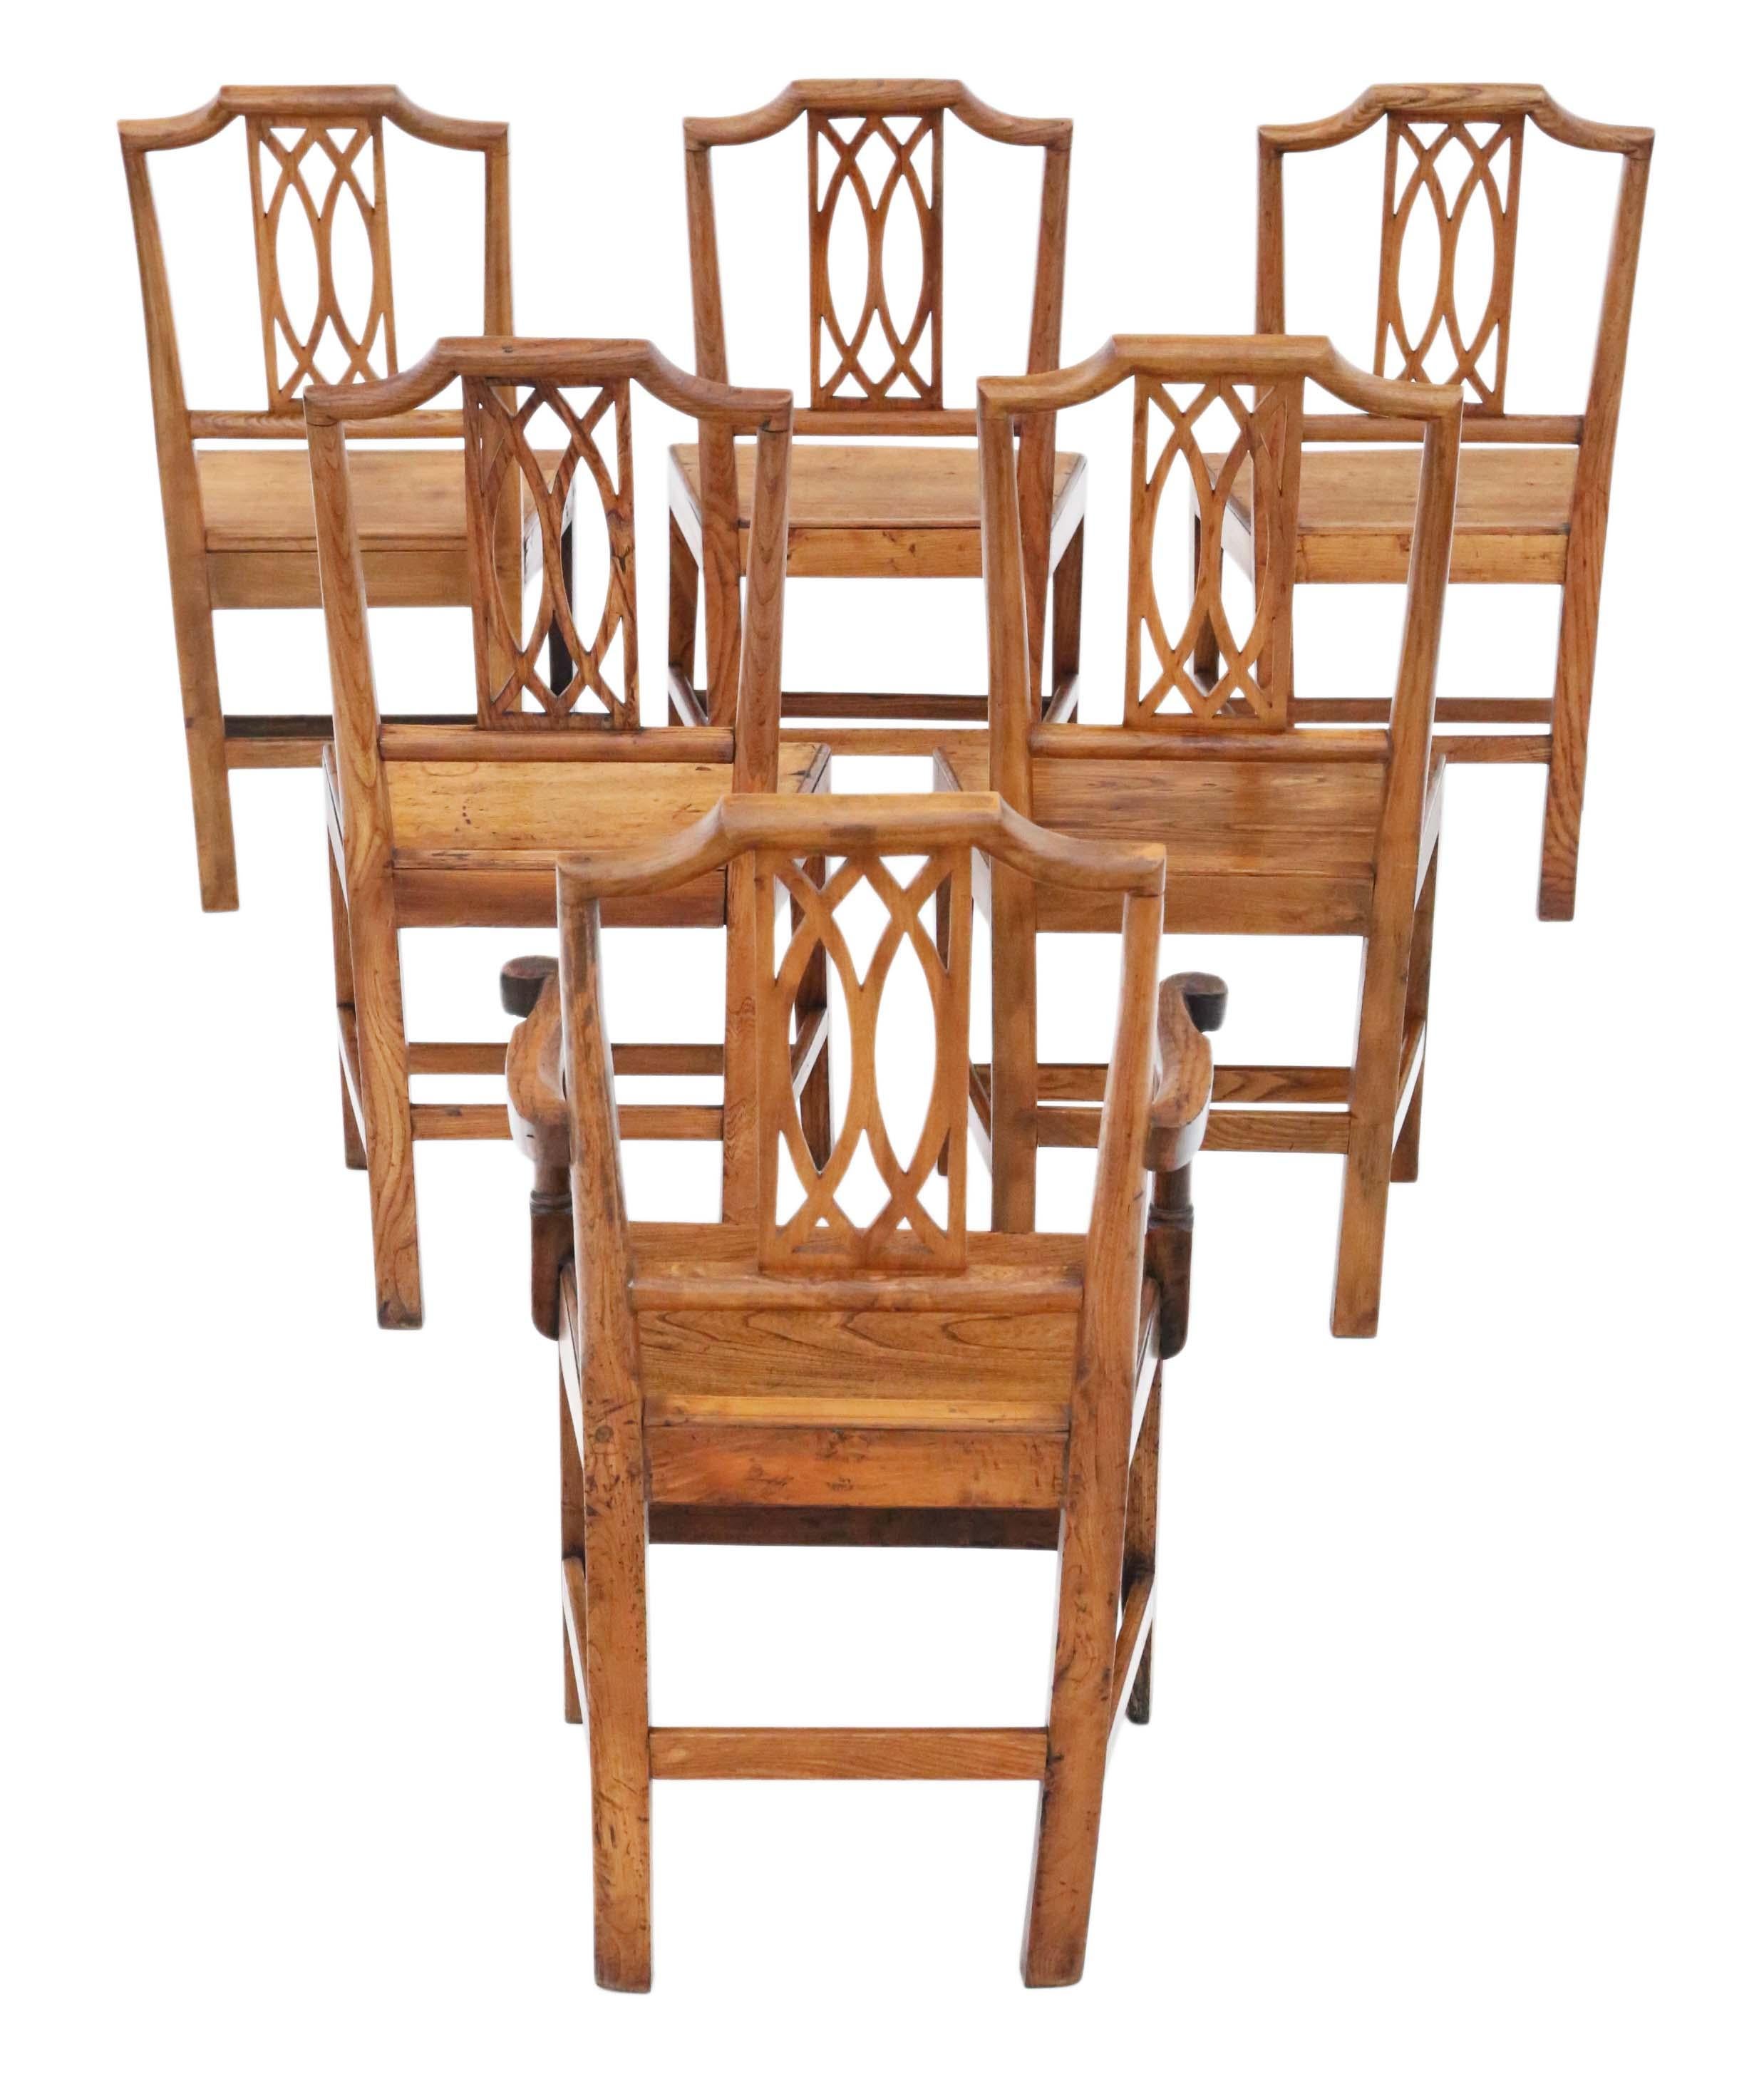 Antique quality set of 6 (5 chairs plus 1 carver) 19th Century elm kitchen dining chairs. Very rare design!

Lovely age, character and charm. No loose joints.

Overall maximum dimensions:

Chair 51cm W x 42cm D x 97cm H (45cm H seat)

Carver